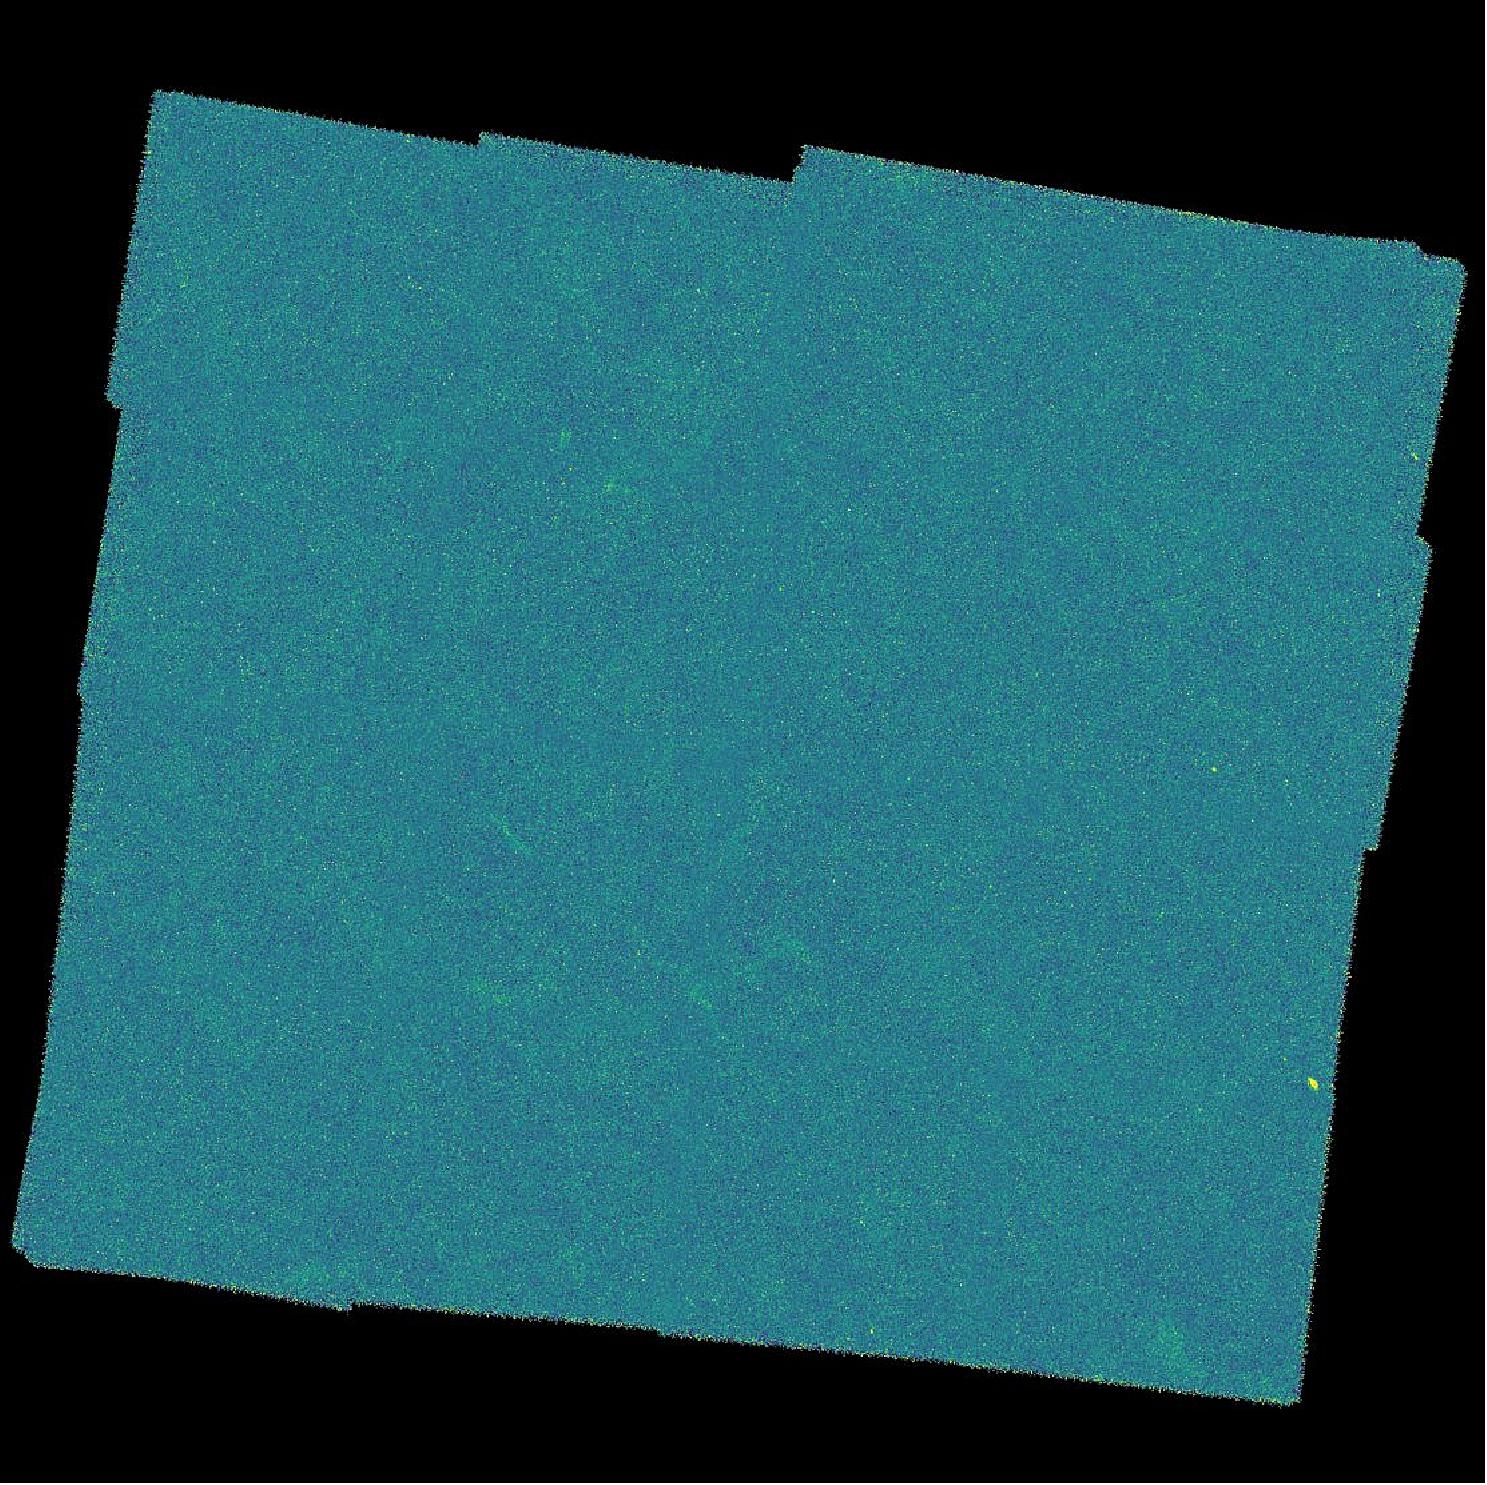 Figure 27: It may look like noise or static, but every single point in this image is a galaxy seen by ESA’s Herschel Space Observatory (image credit: ESA/Herschel/SPIRE; M. W. L. Smith et al 2017)